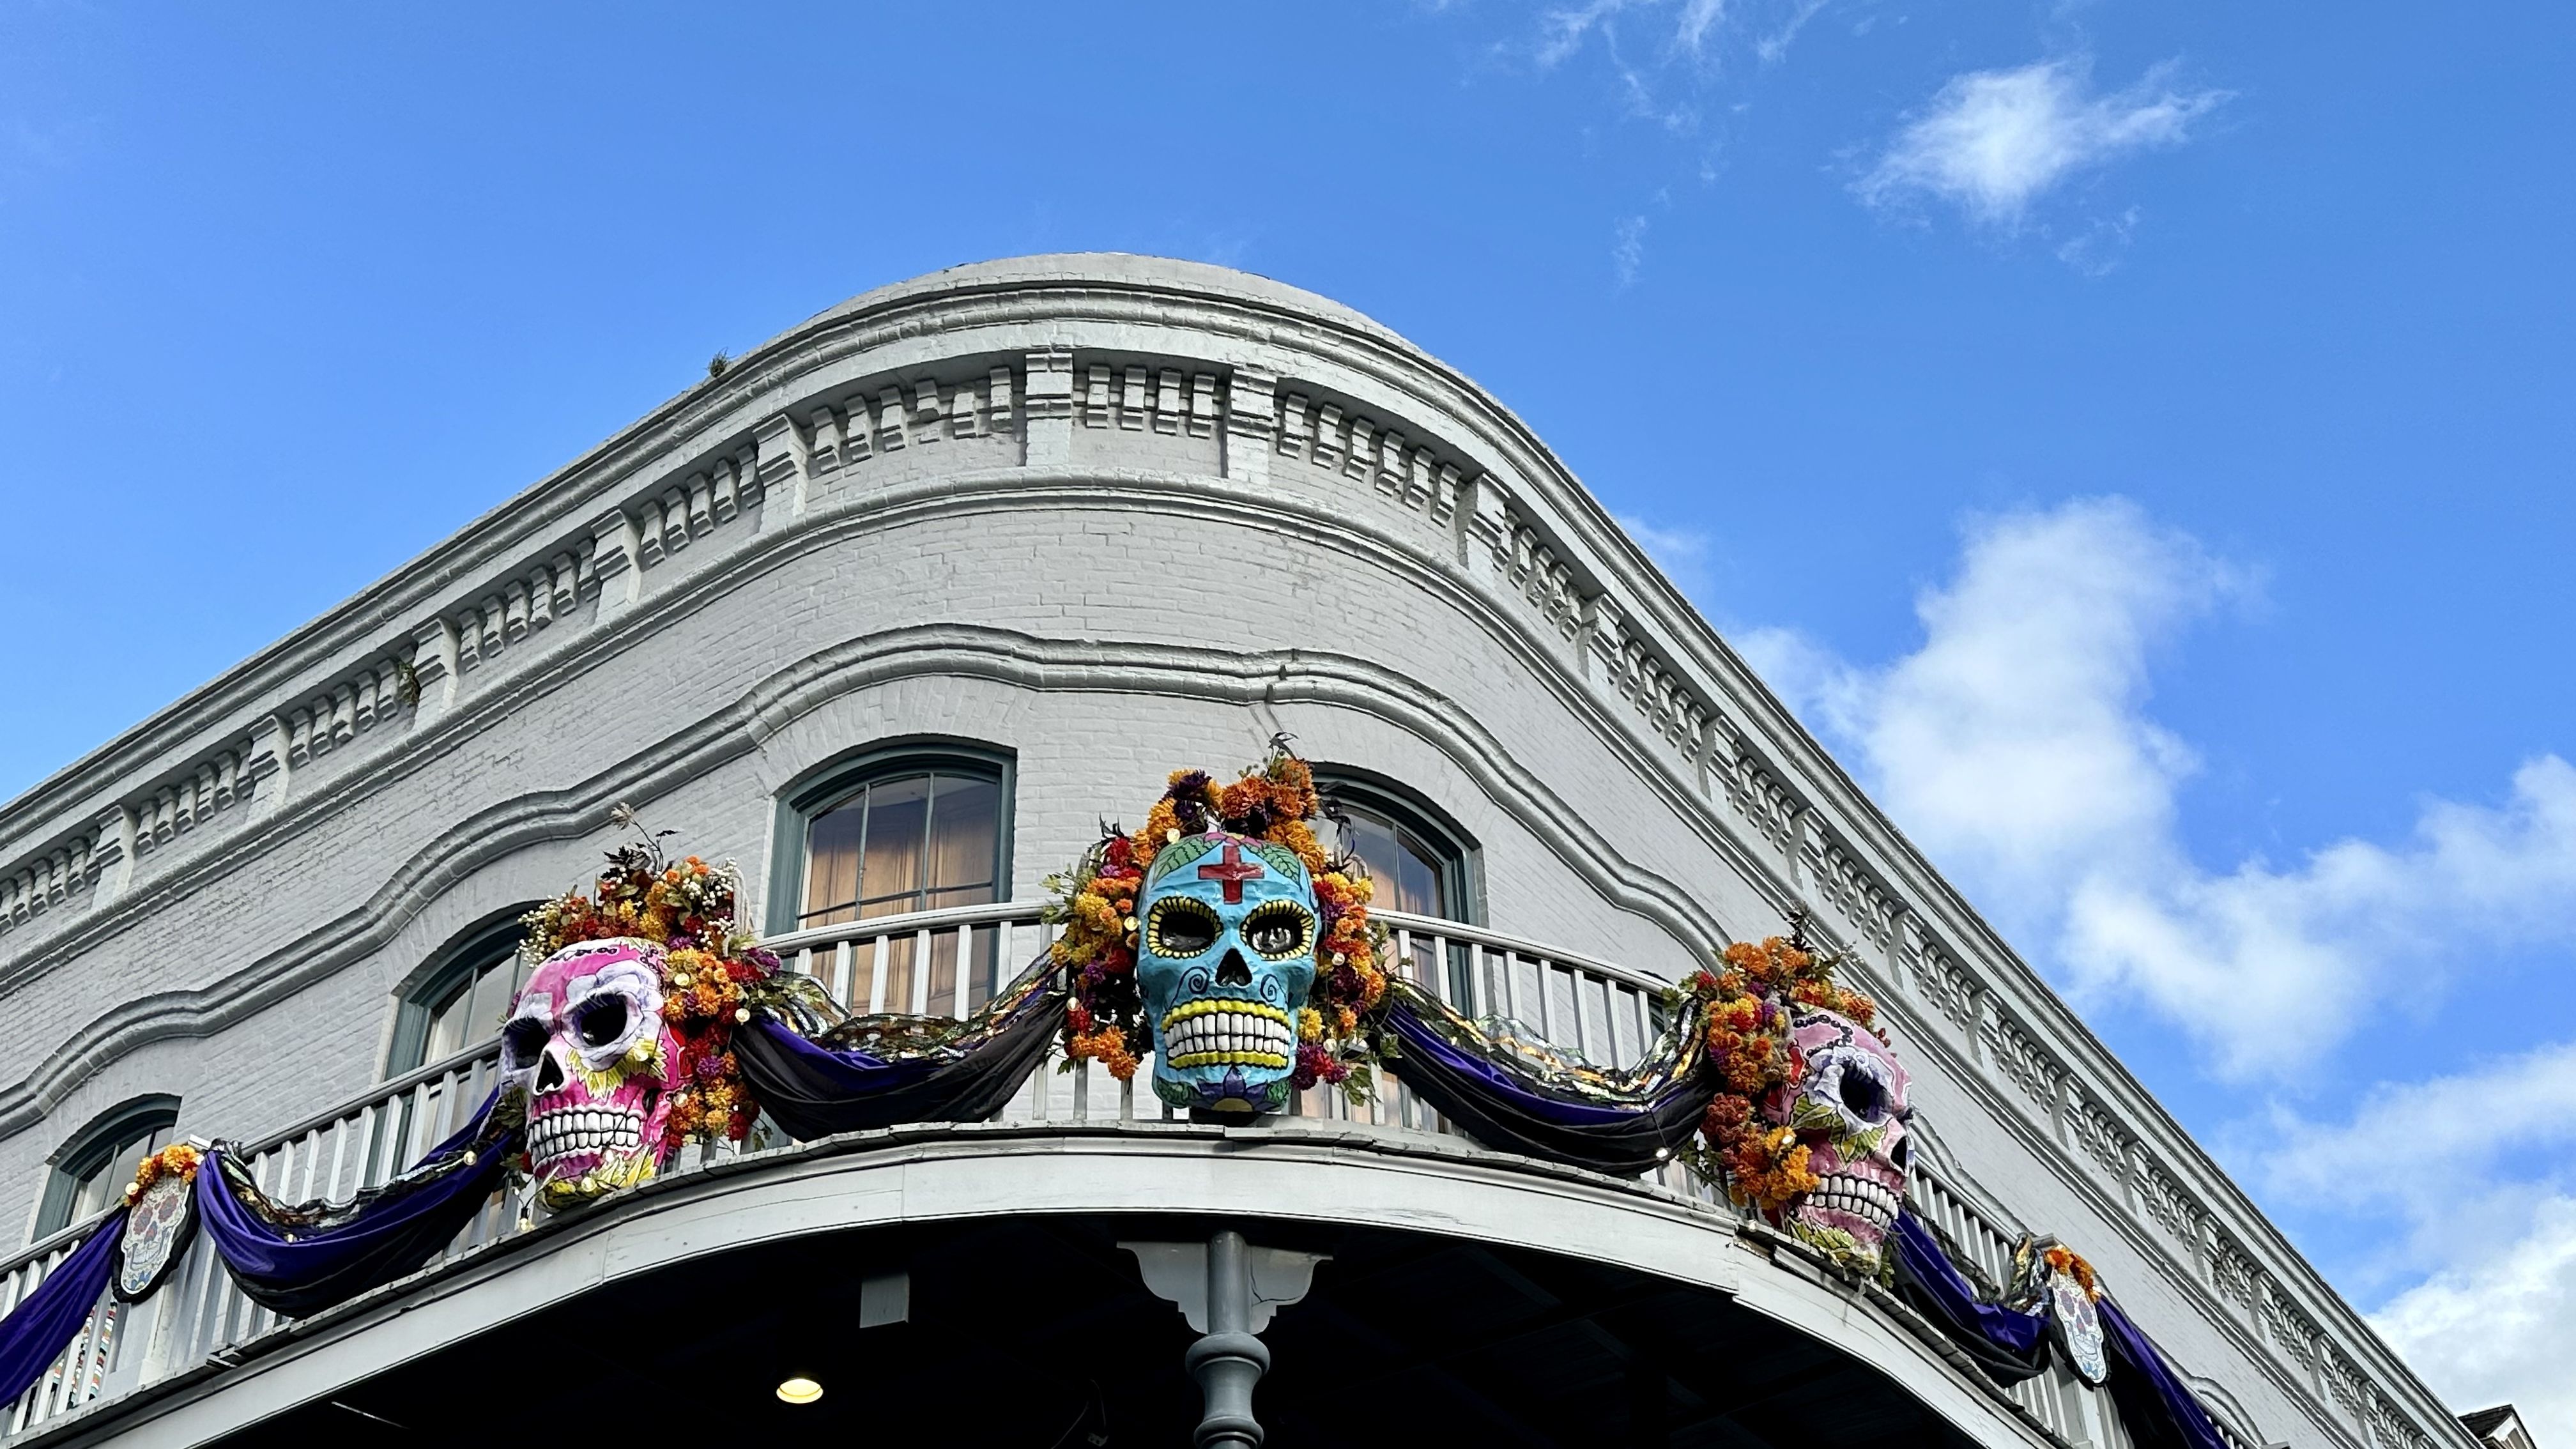 Photo shows Day of the Dead skulls on the balcony of a French Quarter building